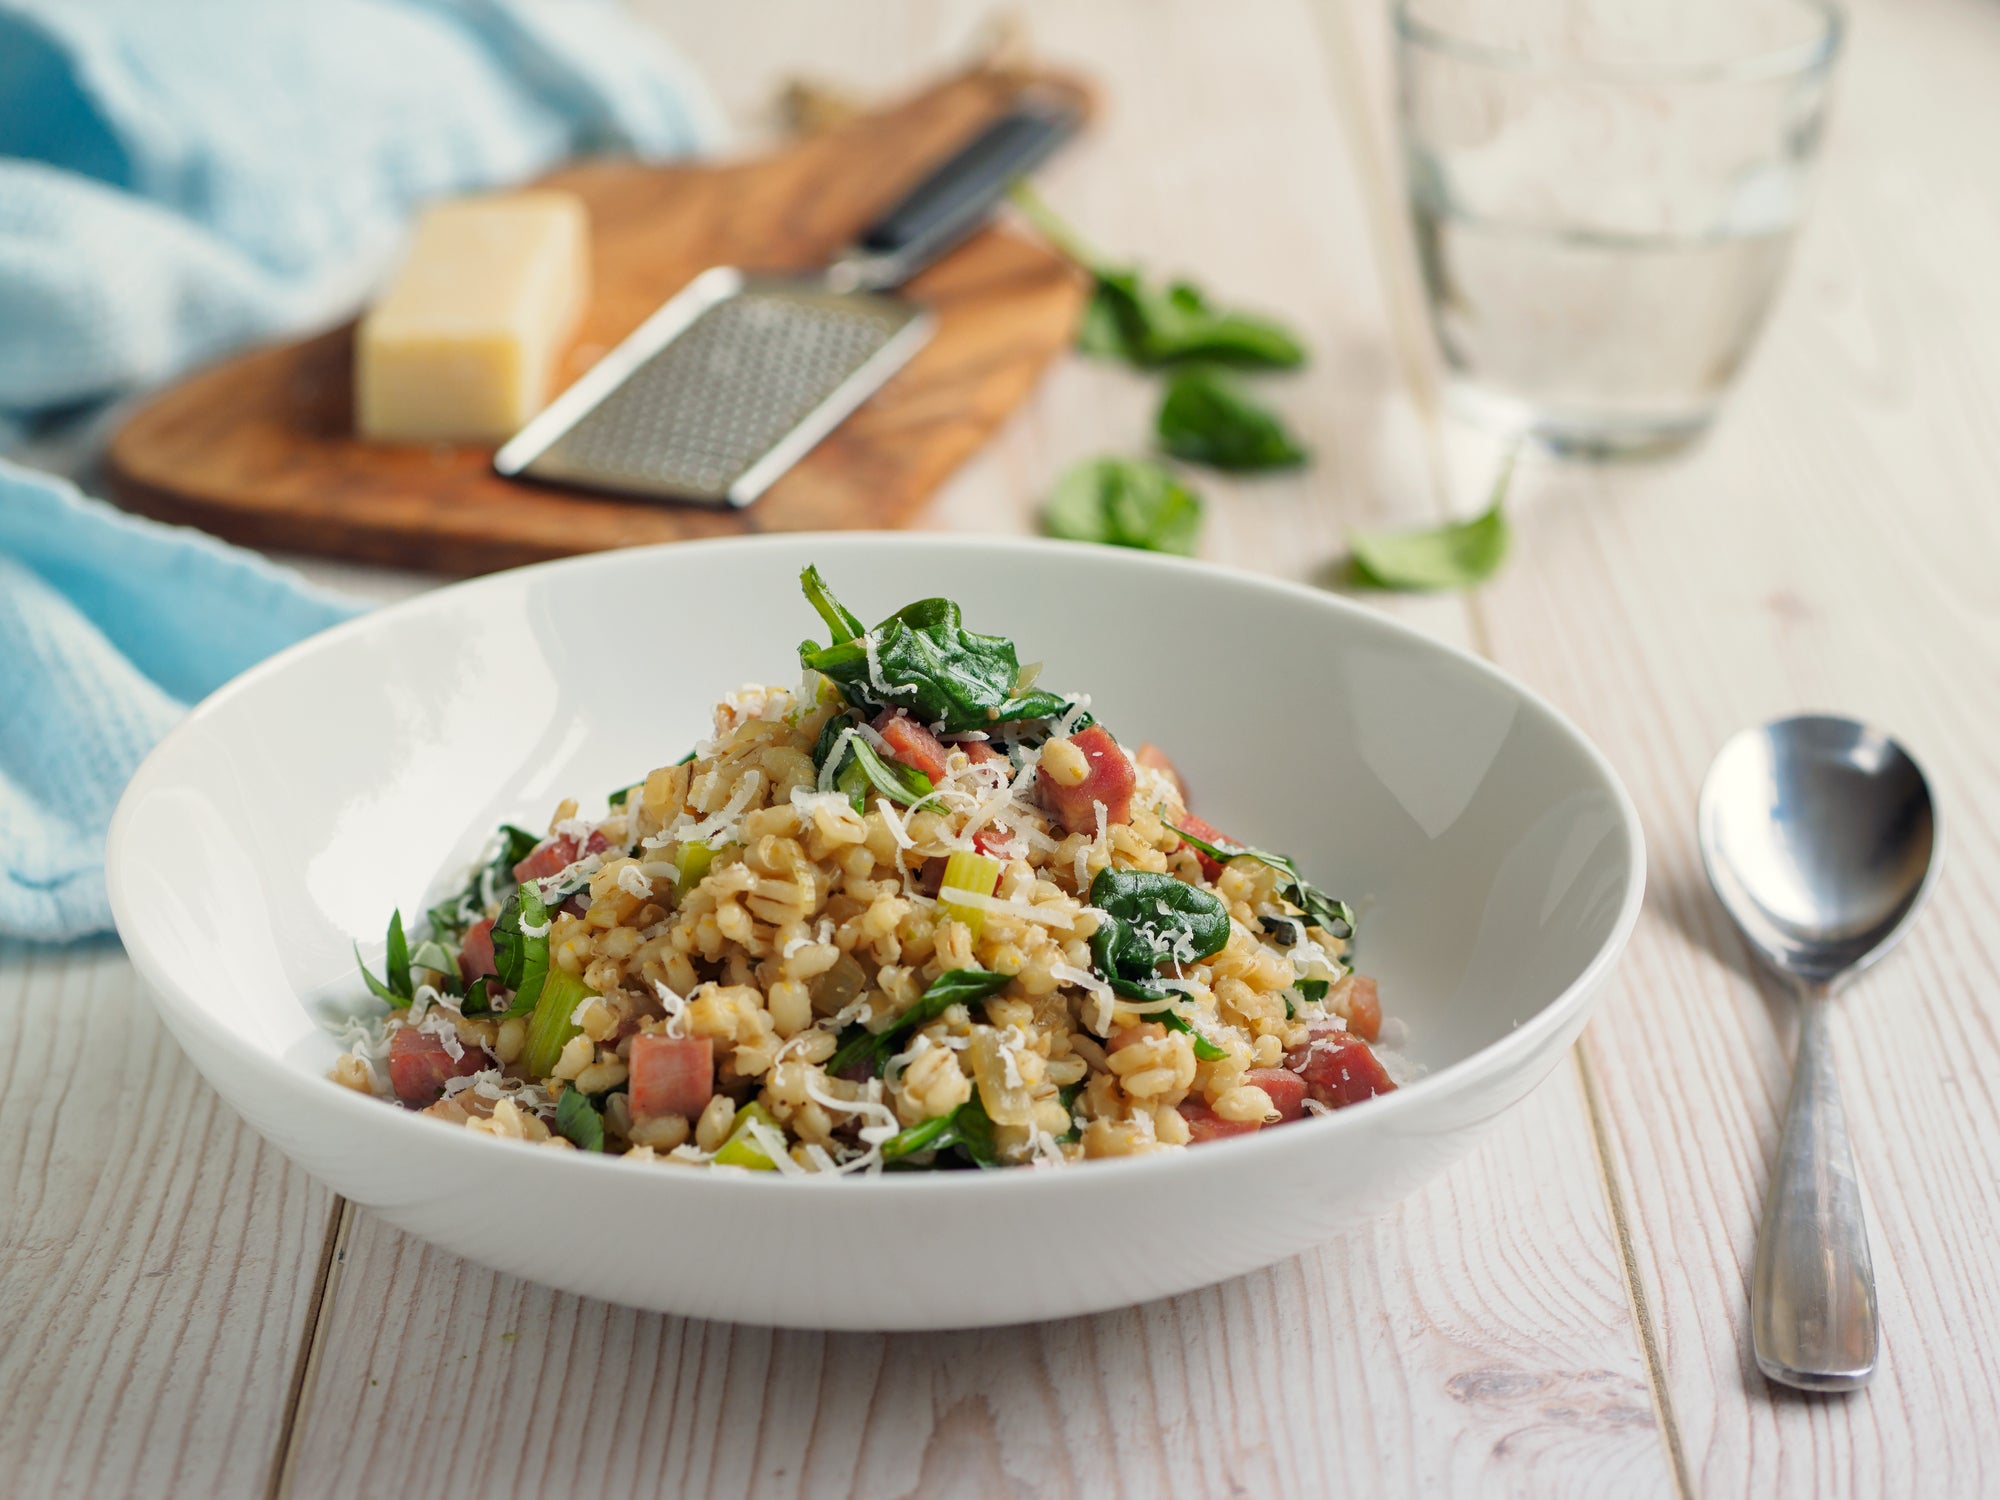 Risotto is no longer just for special occasions